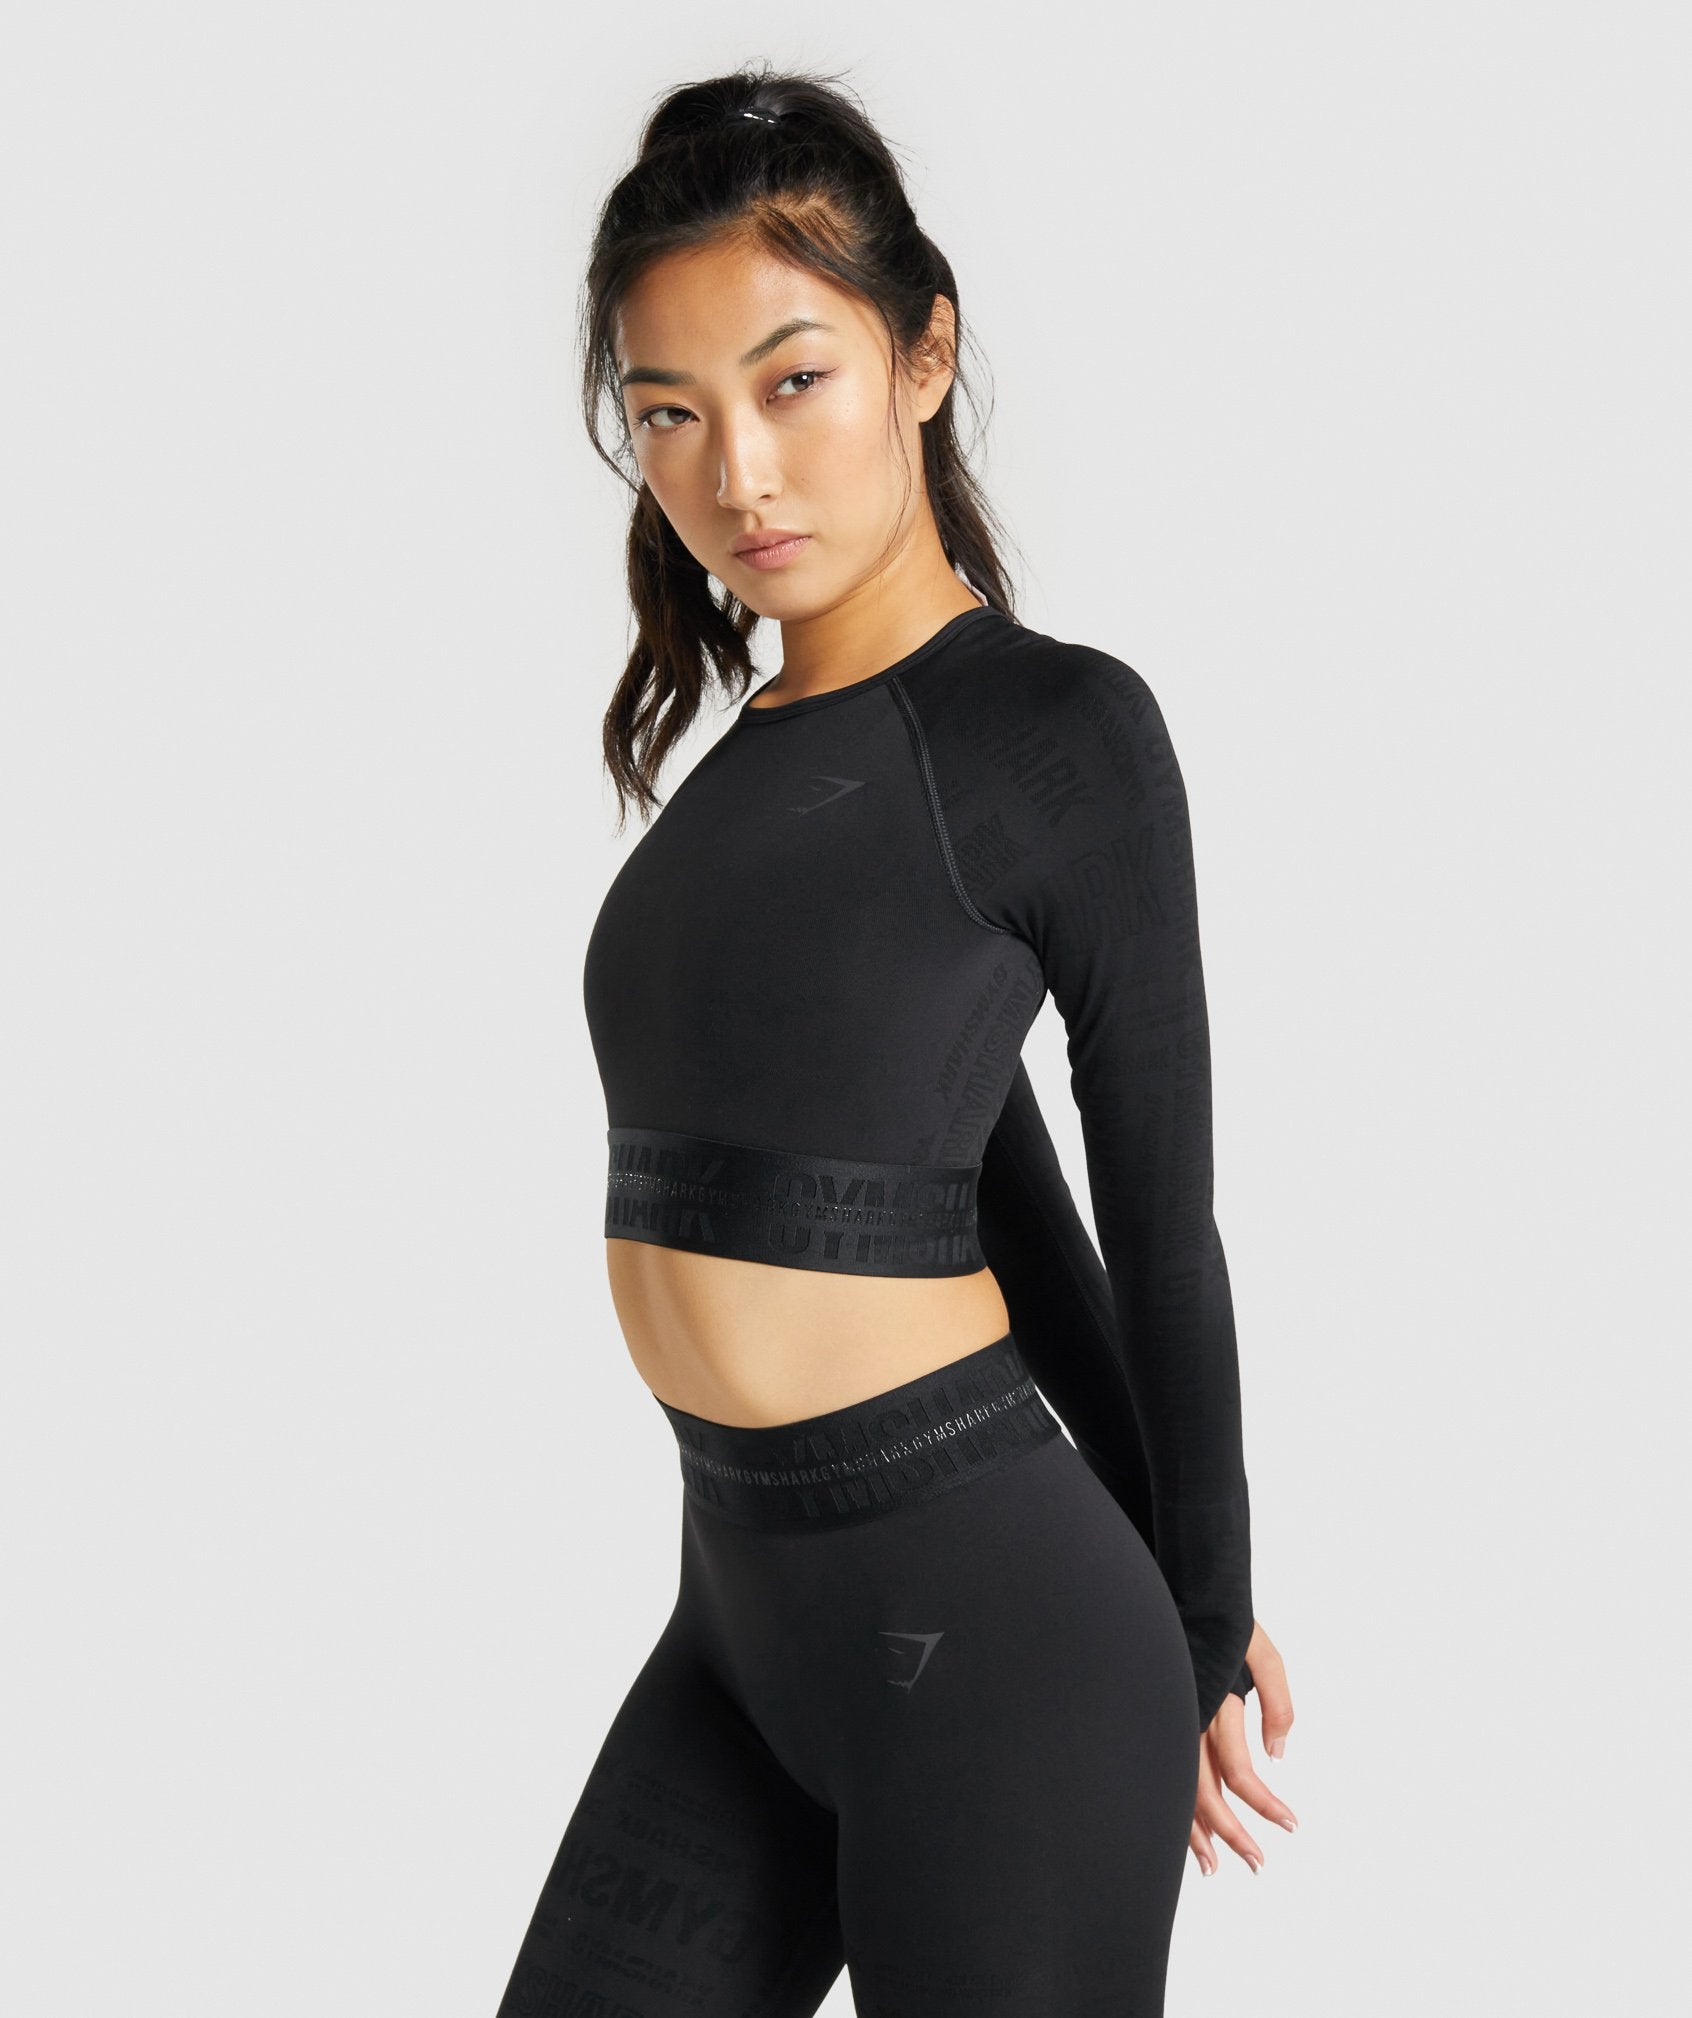 Womens Newsnow Wigan Athletic Wear: Slim Fit Long Sleeve Crop Top With  Thumb Holes, Halter Neck, And Built In Bra For Yoga And Workouts From  Vinana, $12.87